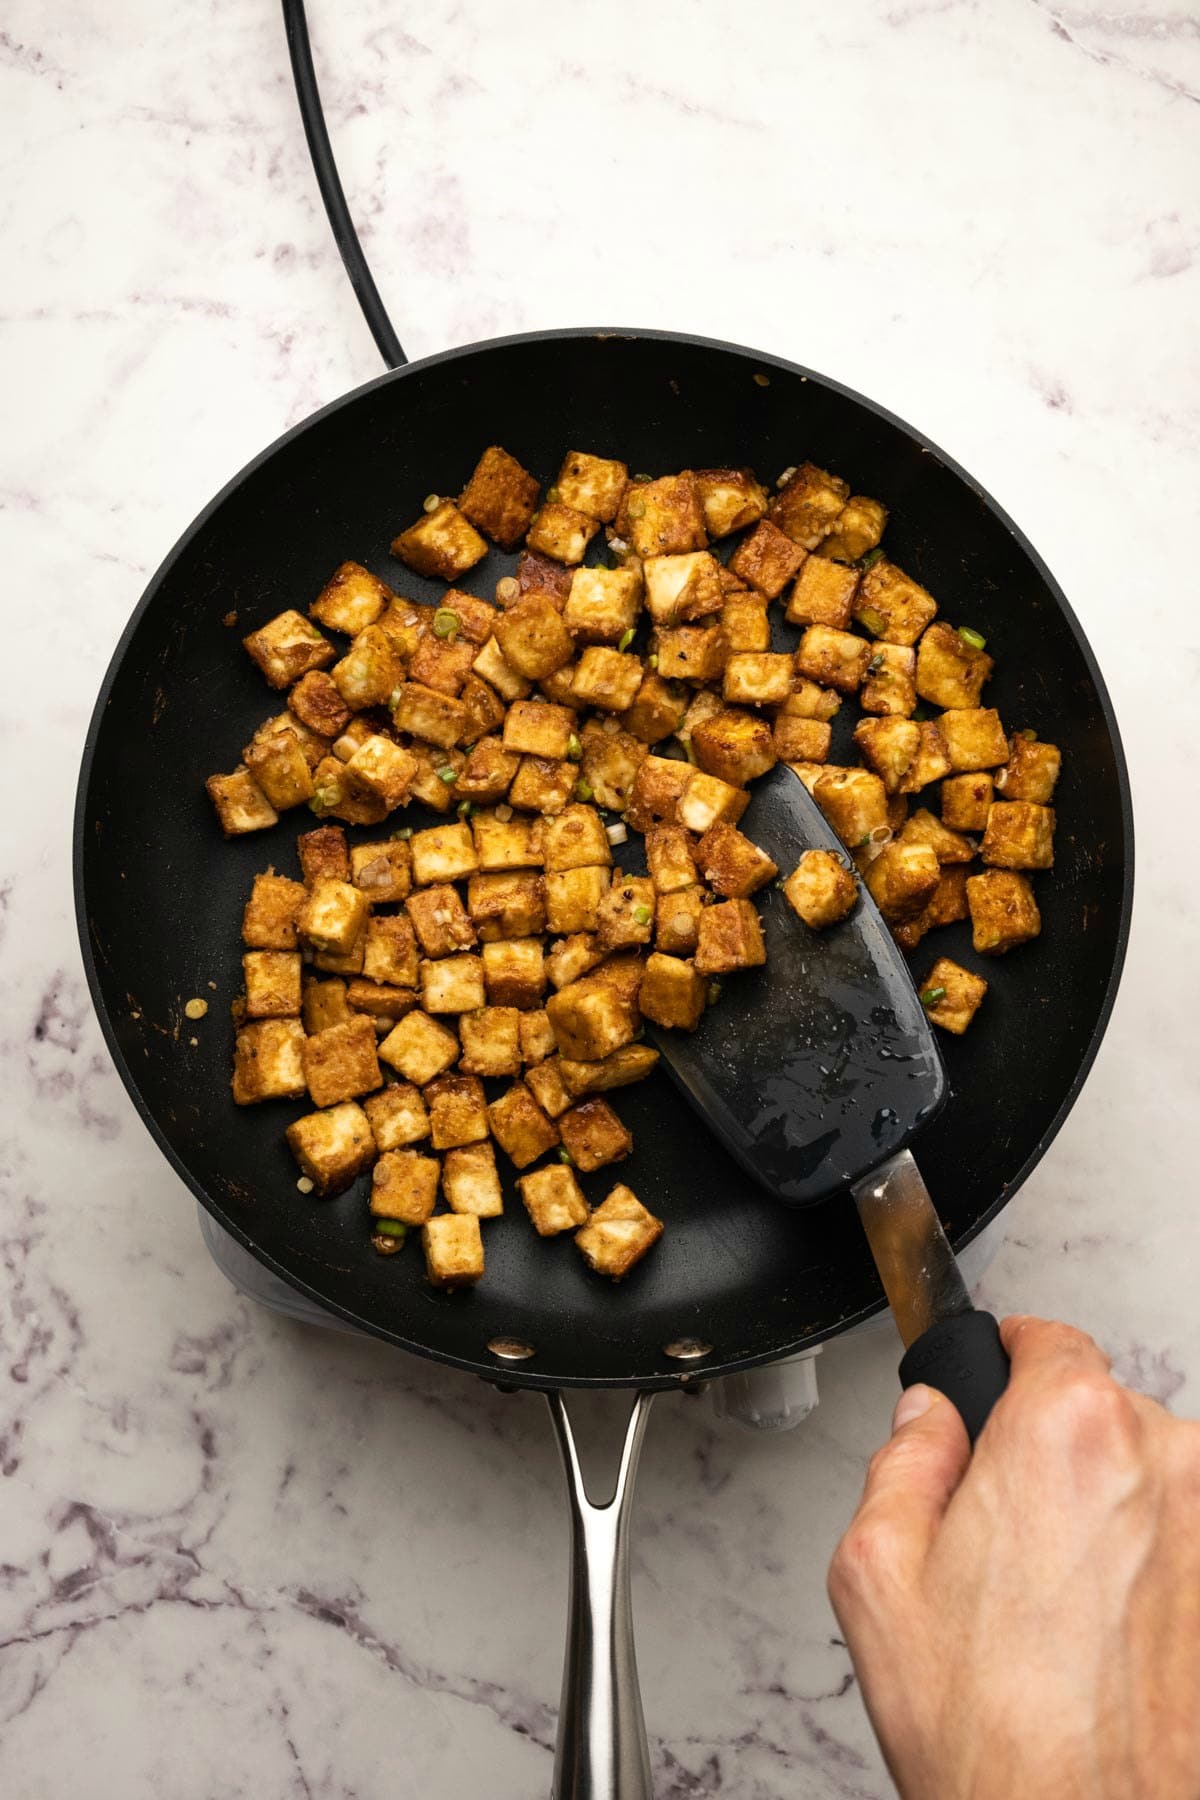 Fried tofu in a pan with a spatula.